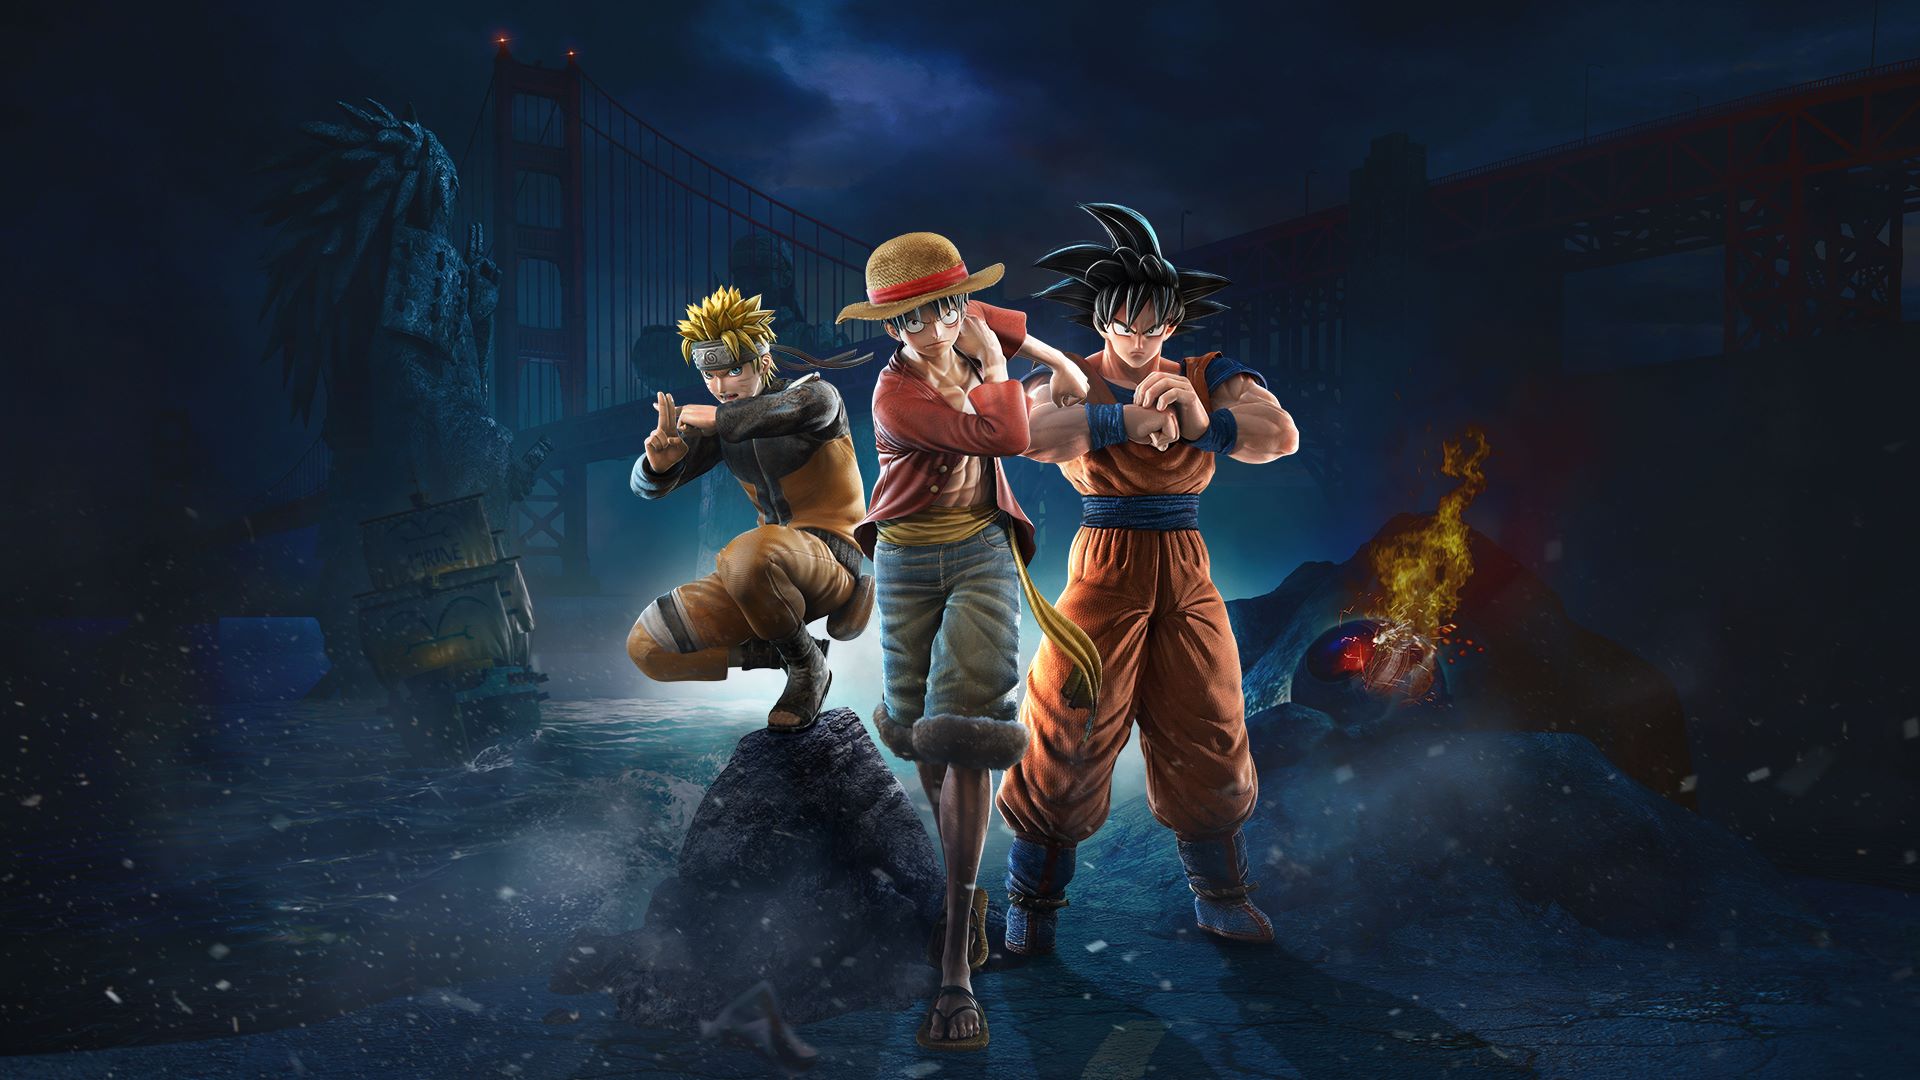 Reminder Manga Fighting Game Jump Force Is Being Pulled From Sale Today Vgc